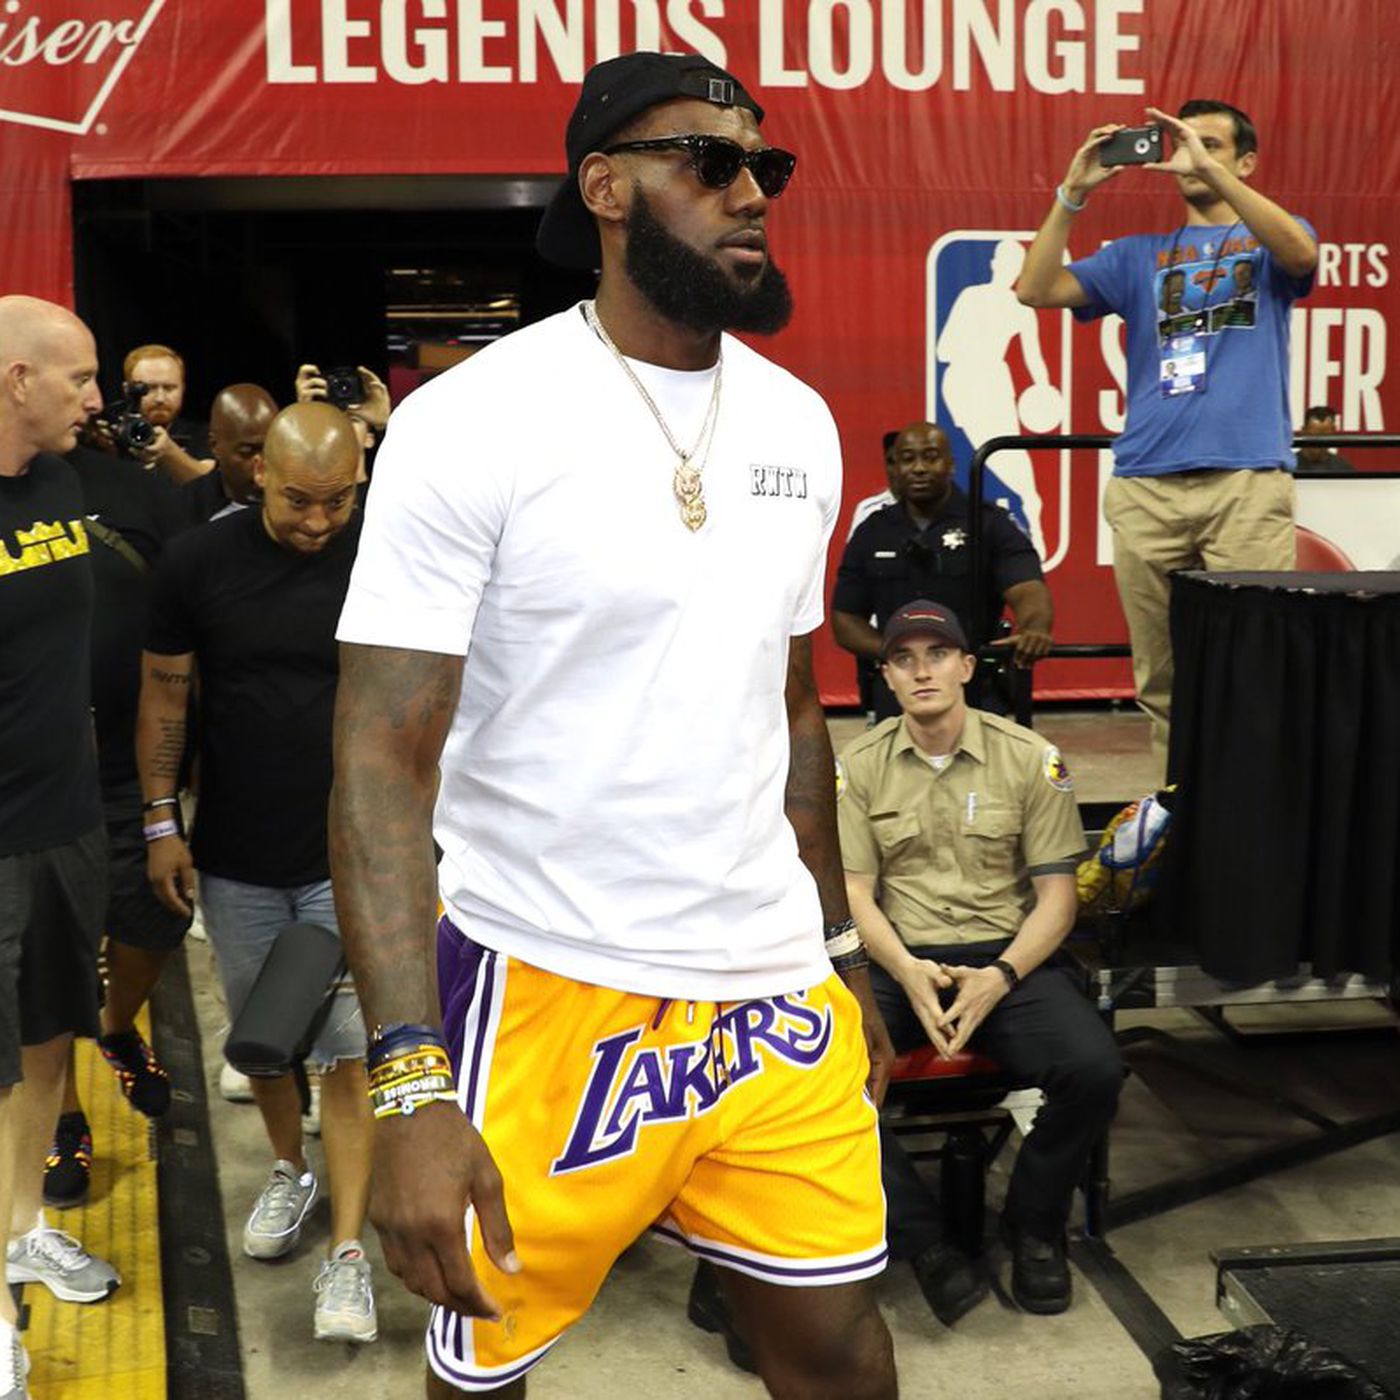 LeBron James and his $500 Lakers shorts were the focus of the ...